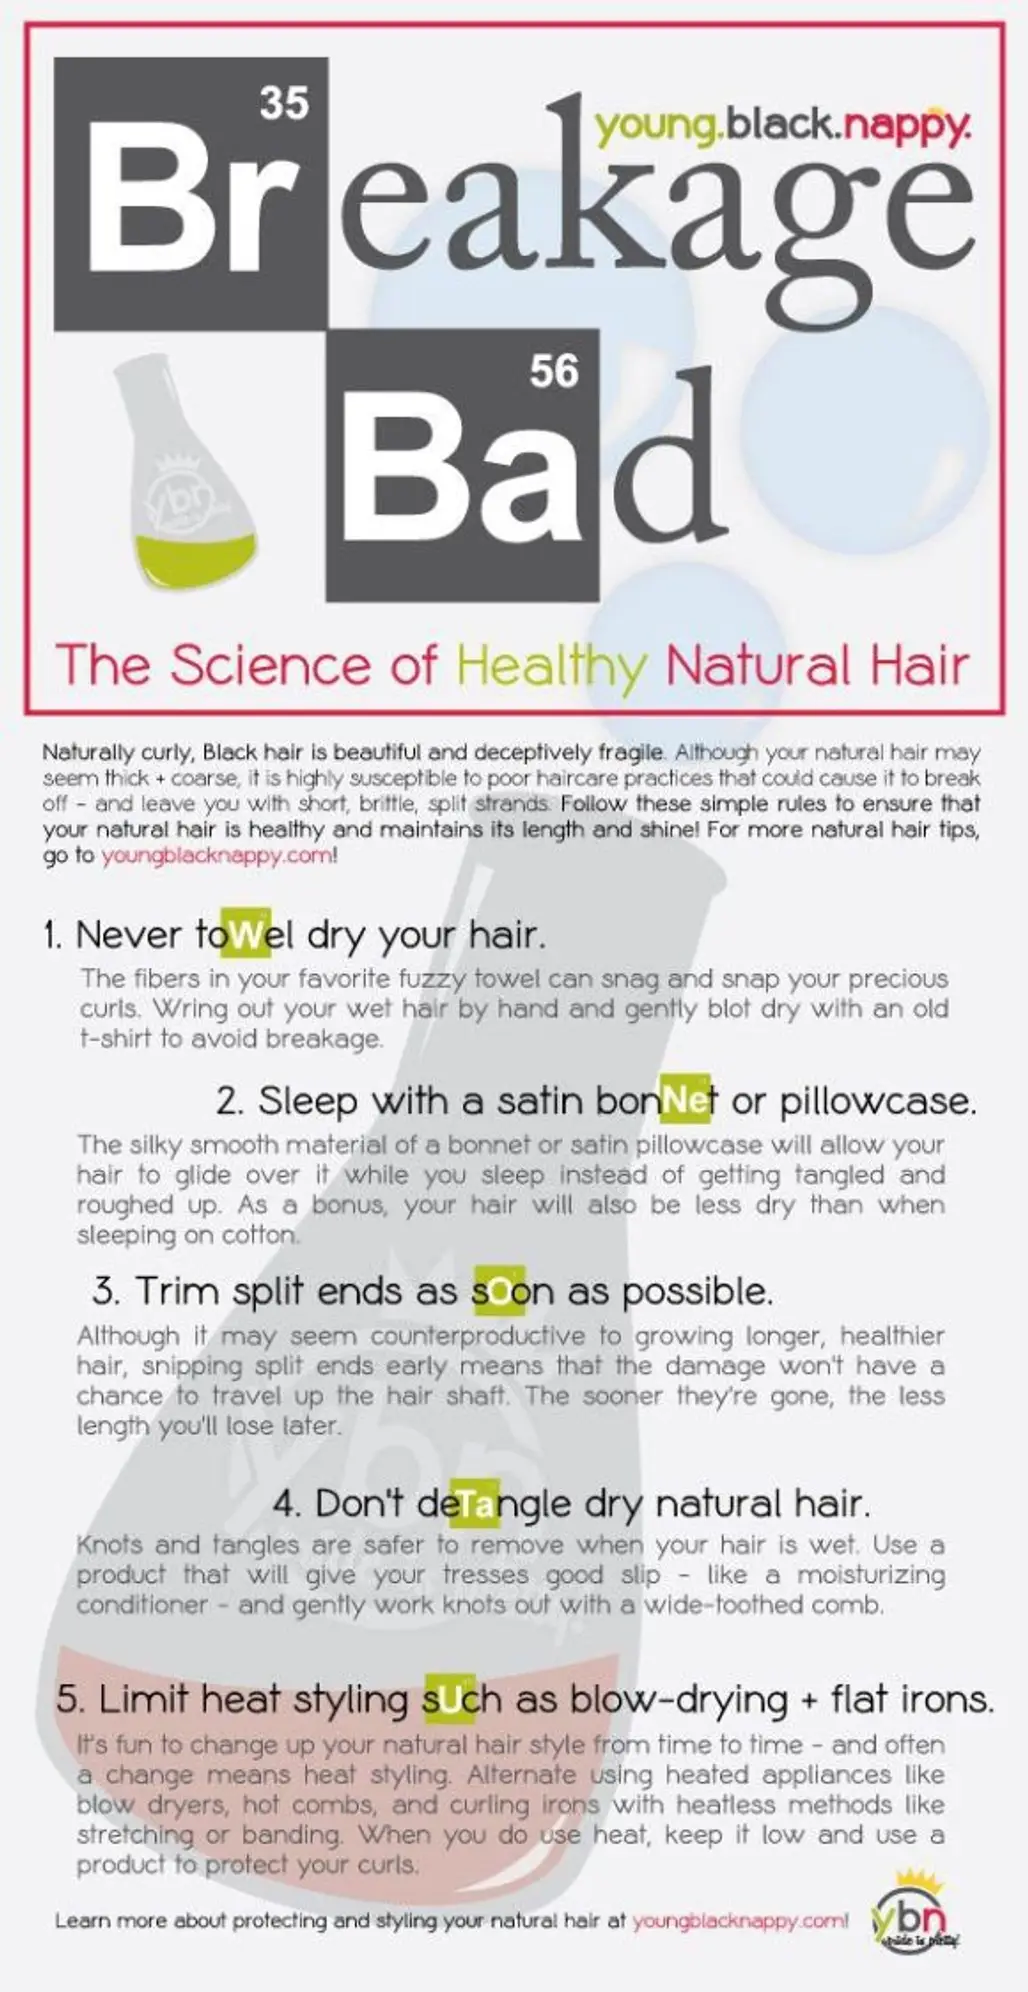 The Science of Healthy Natural Hair